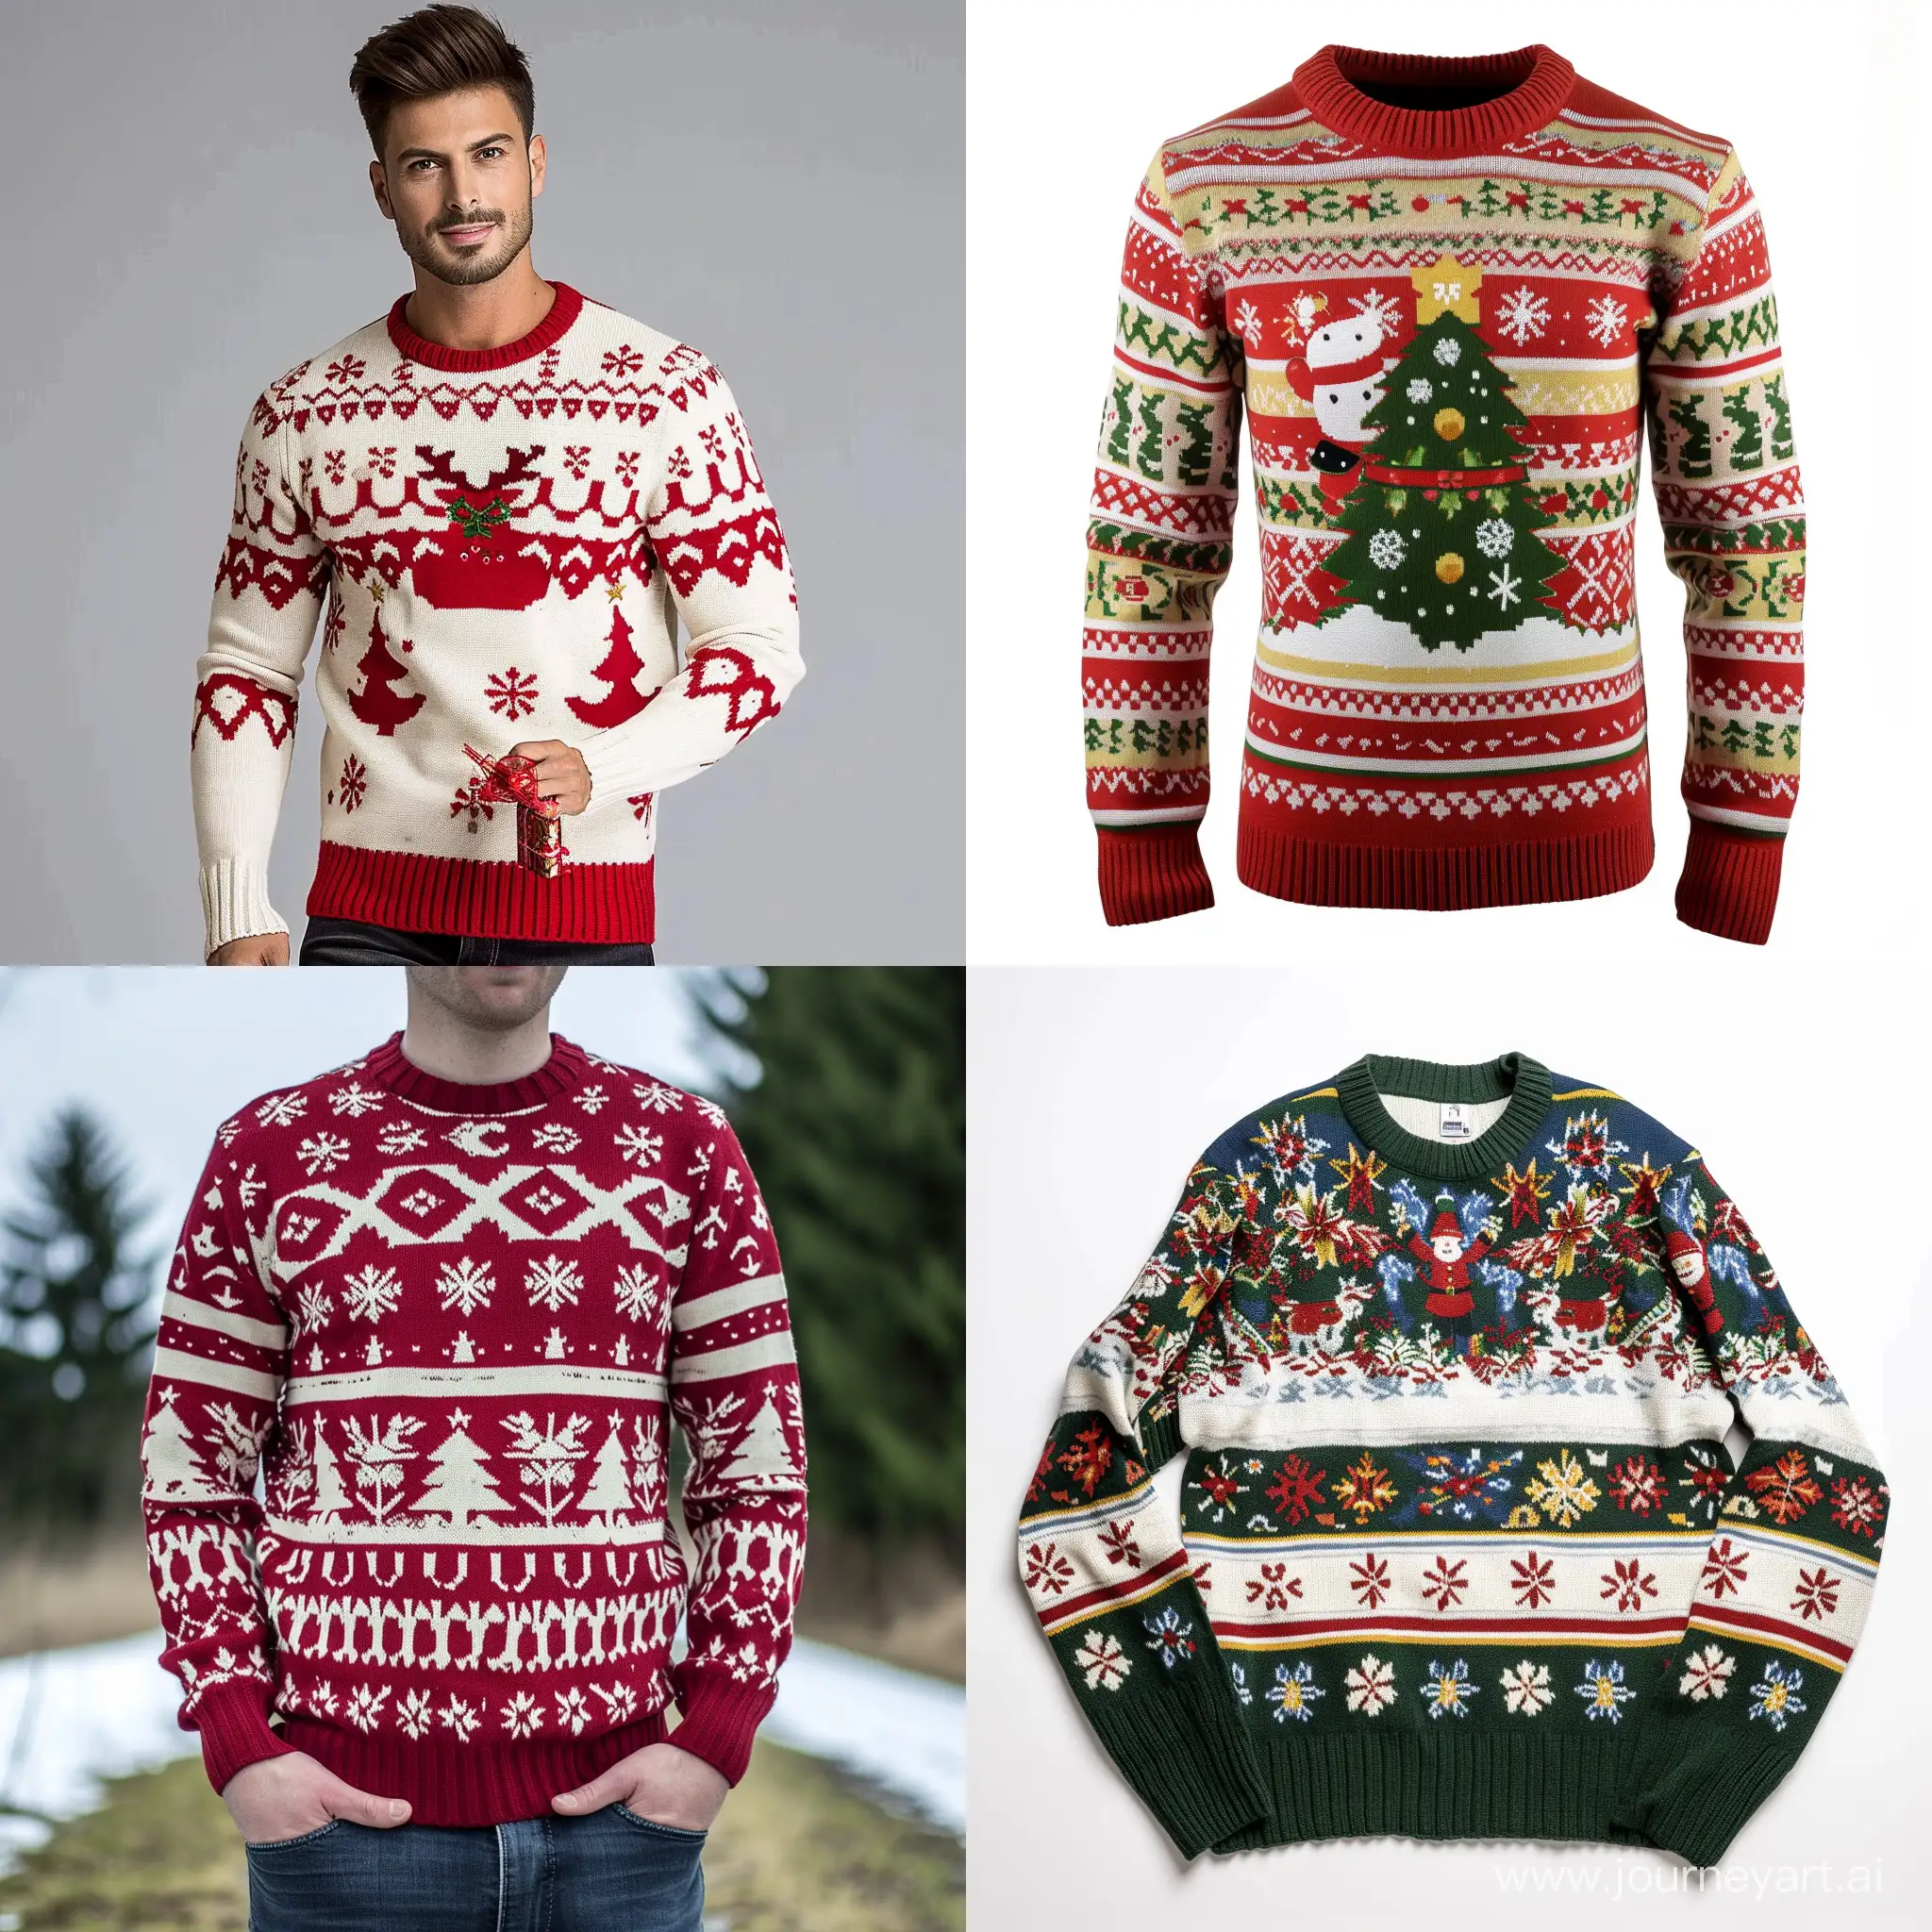 Festive-Christmas-Sweater-Pattern-in-Vibrant-Colors